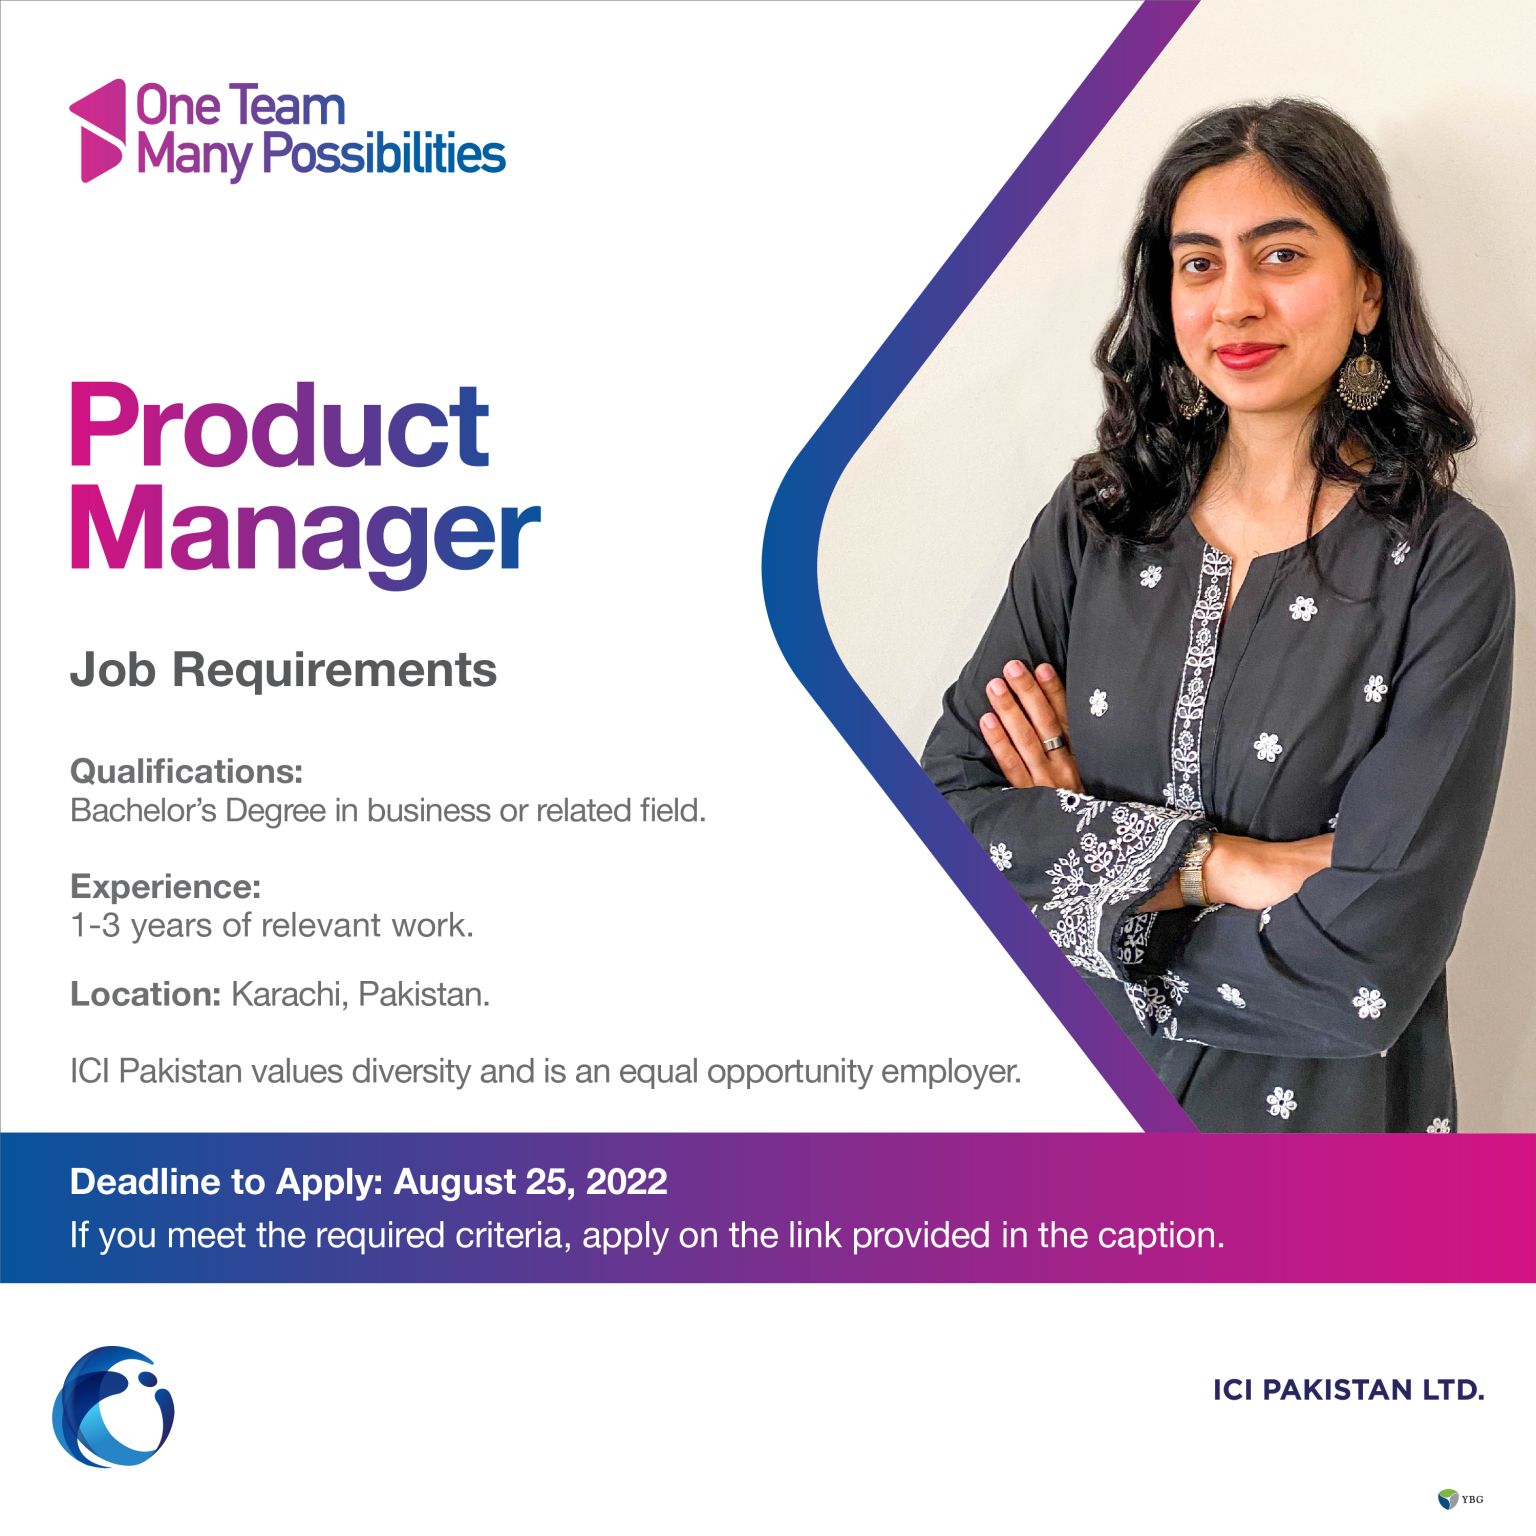 ICI Pakistan Limited Jobs For Product Manager